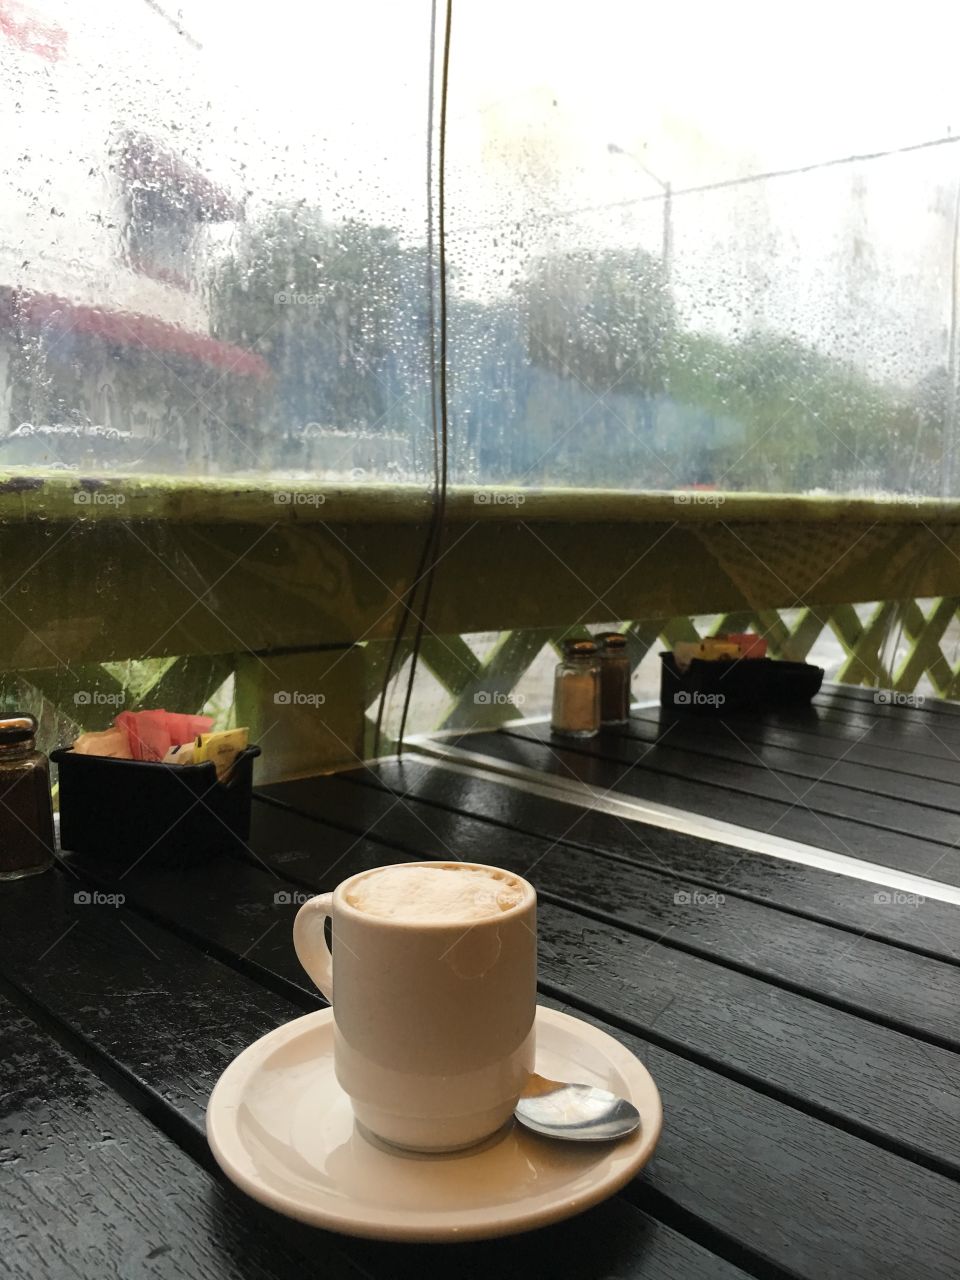 Coffee in the rain. Shot during one of Miami's afternoon showers at Buena Vista bakery in Miami